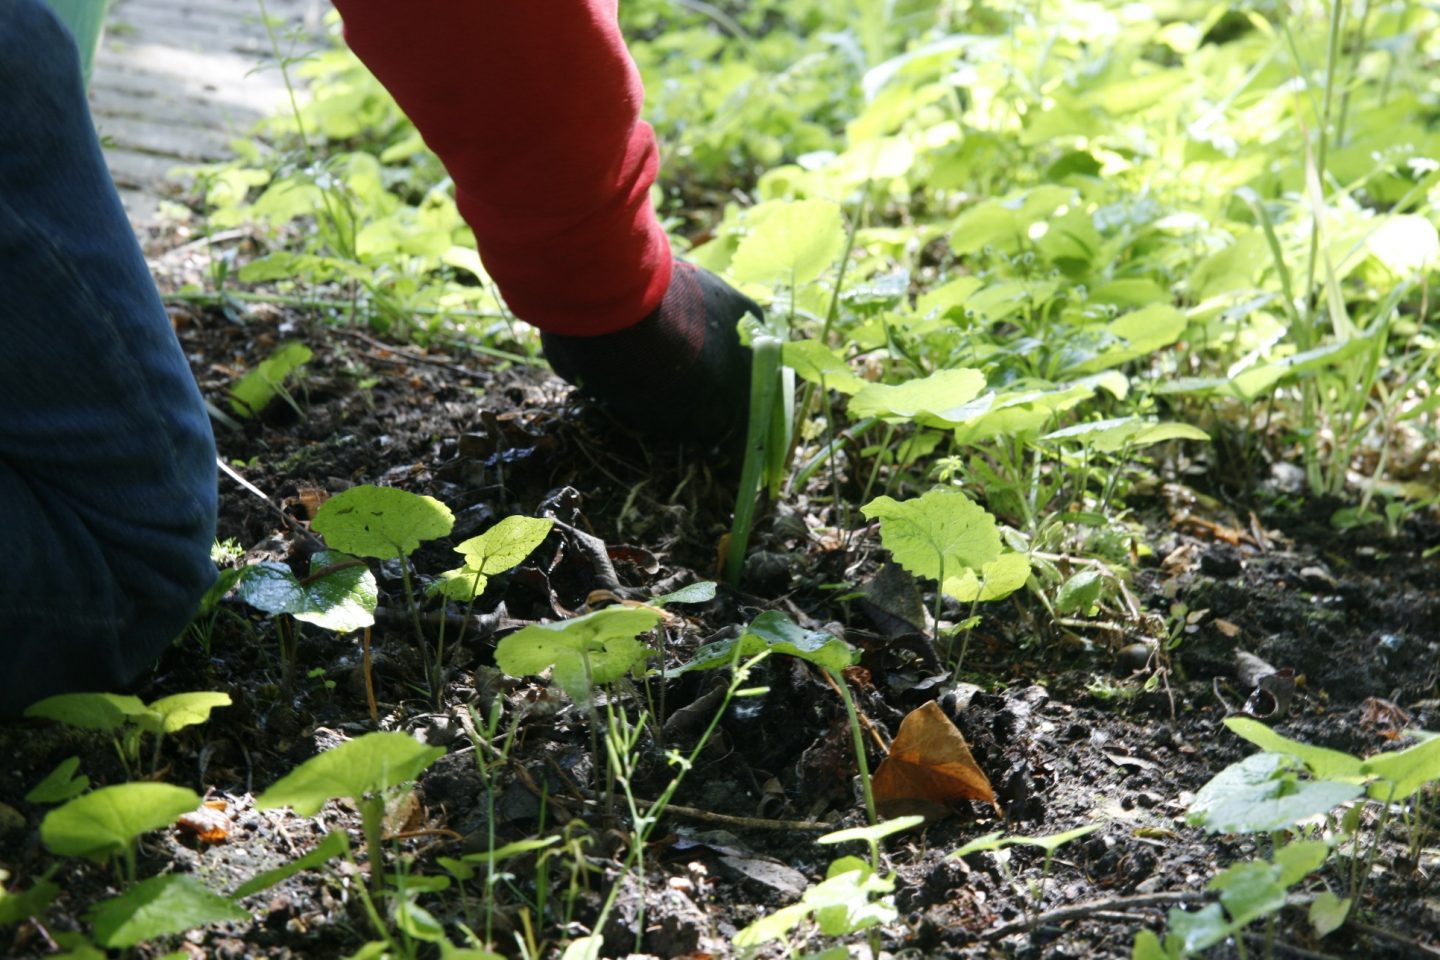 A person pulling up weeds from the soil